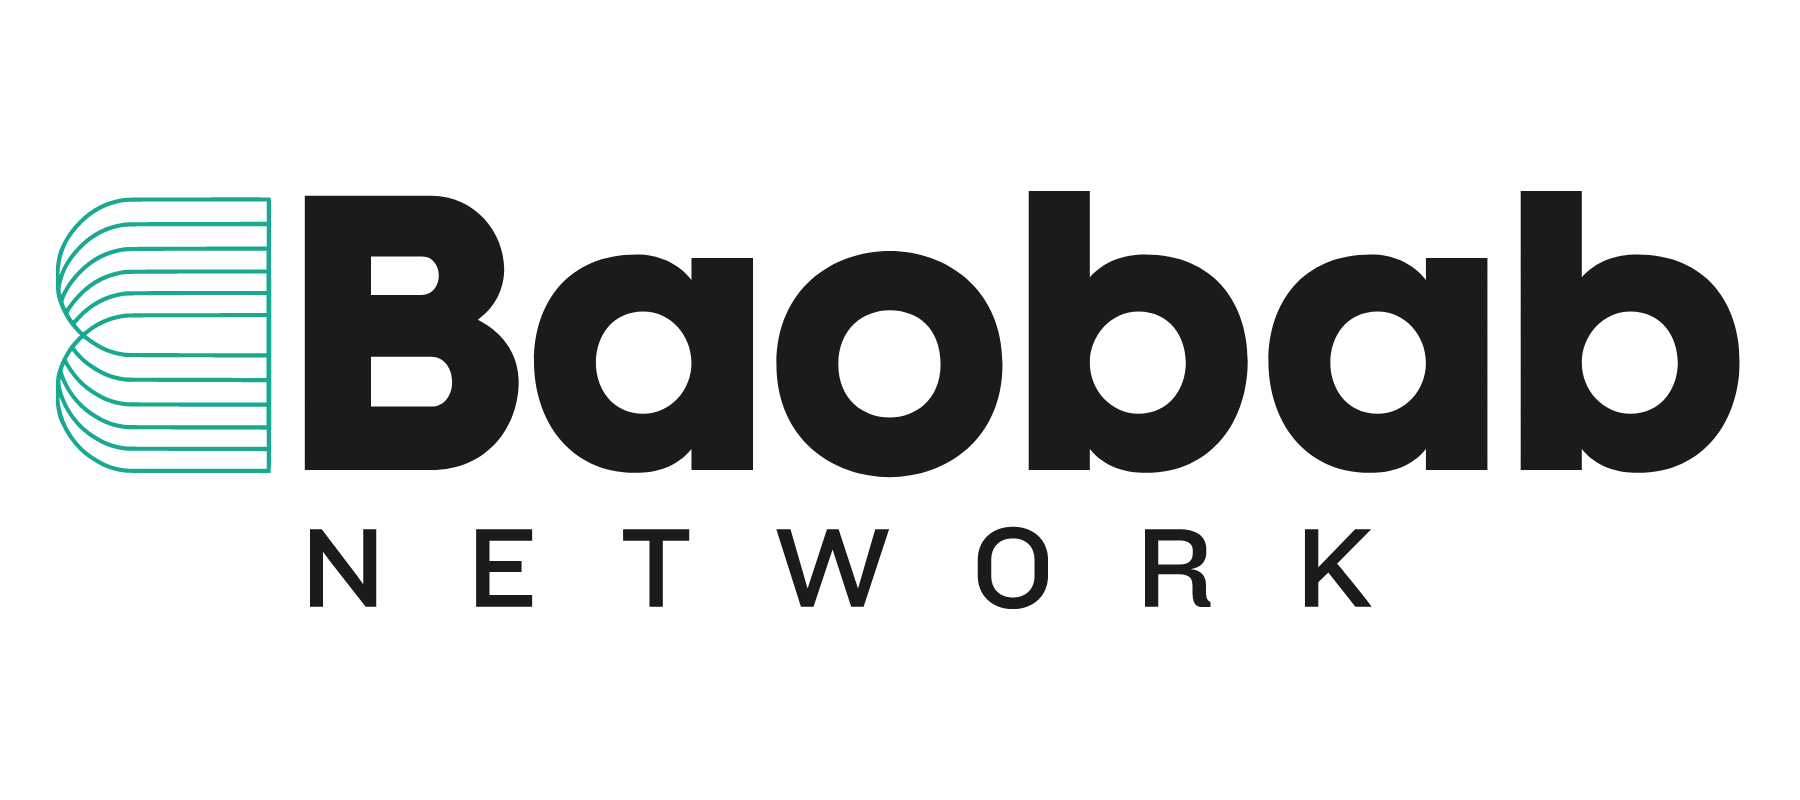 Baobab Network acquires Reflector Marketing to further strengthen support for African startups